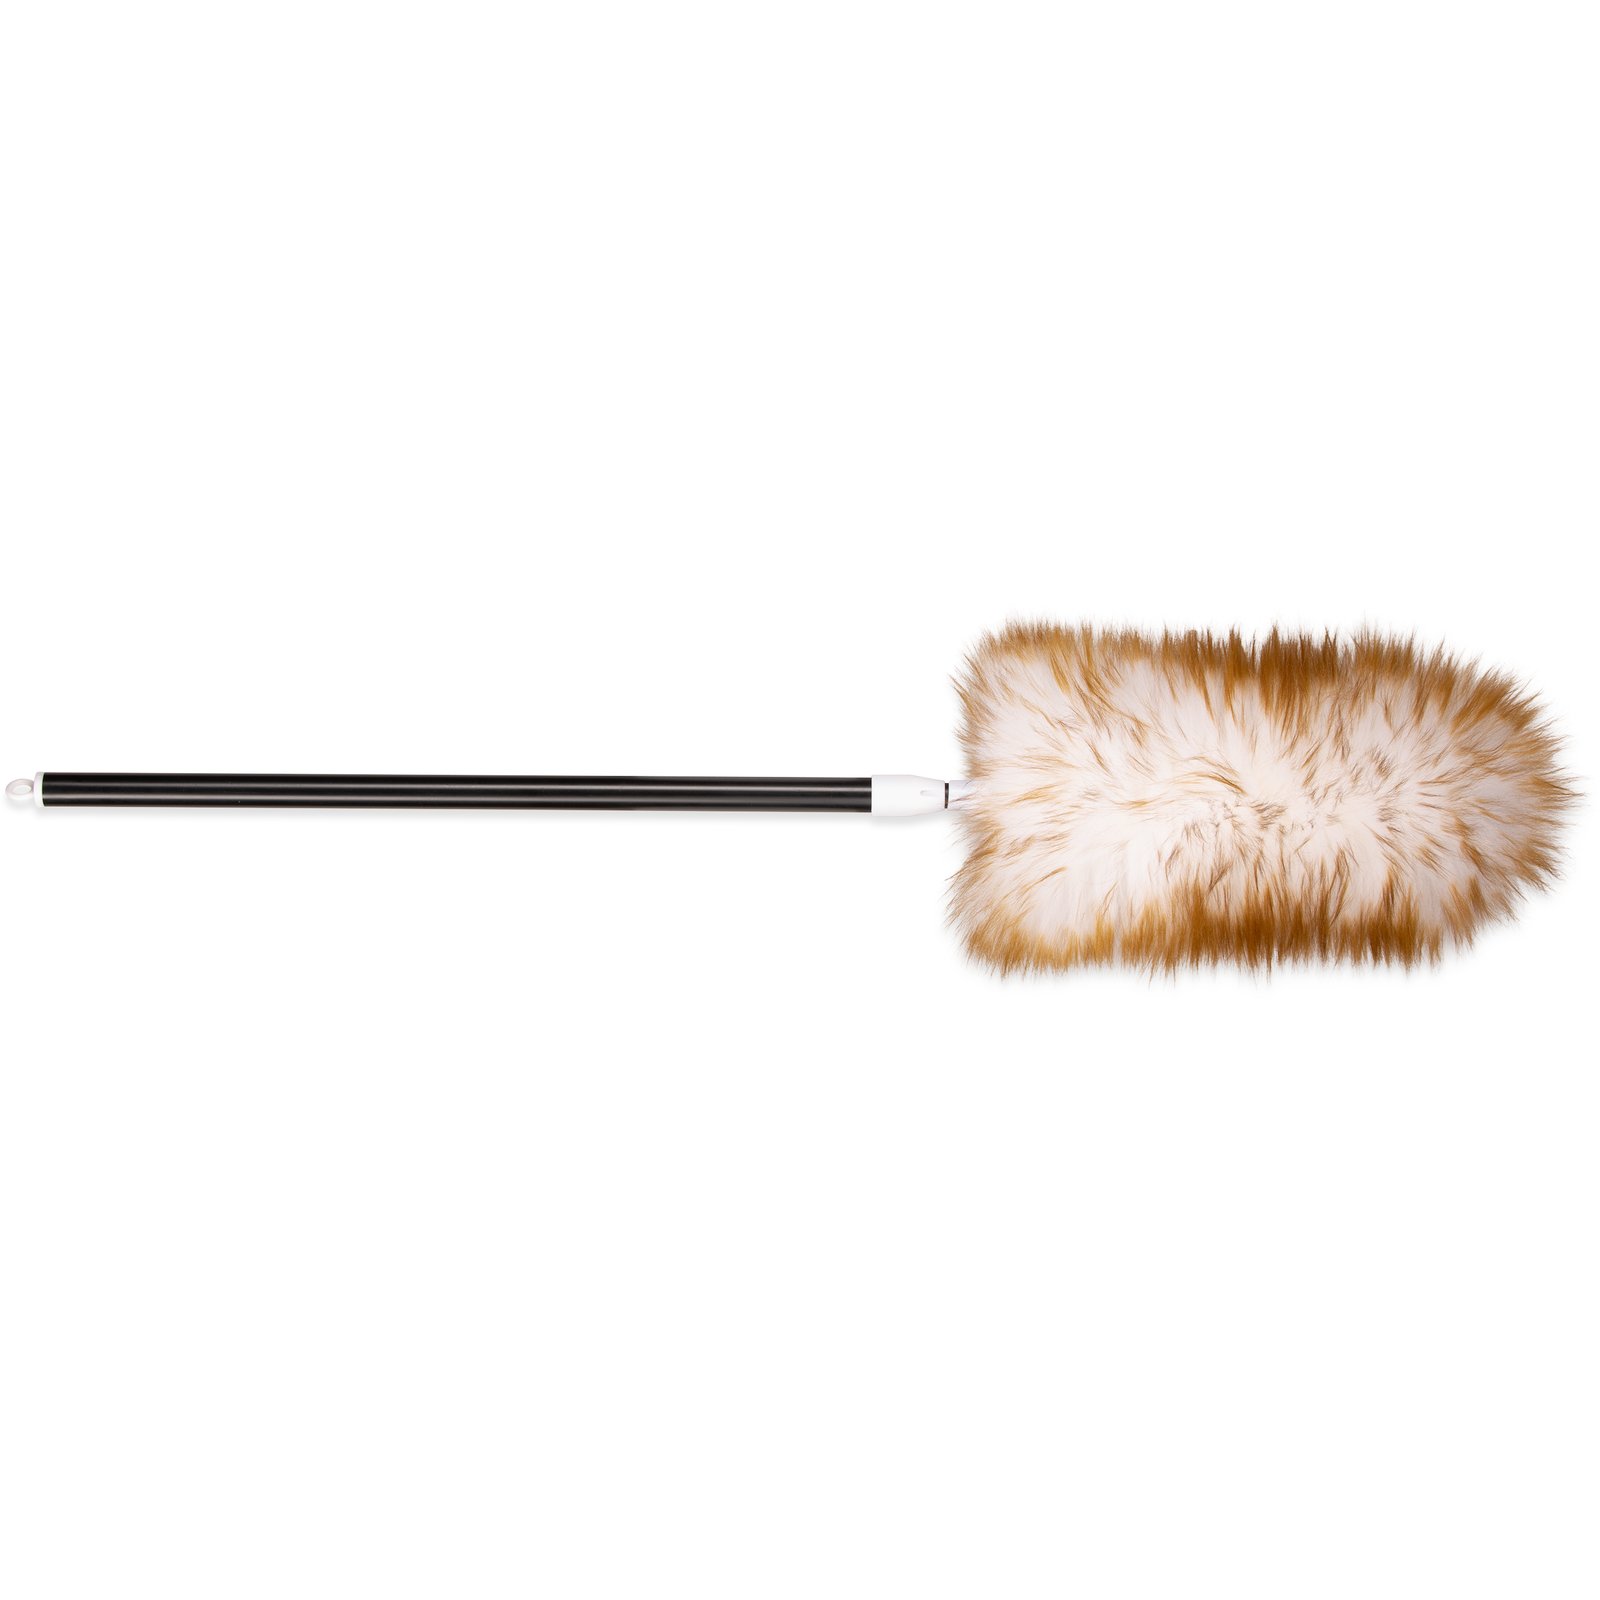 Unger 961420 Telescopic Lambs Wool Duster, 28-43